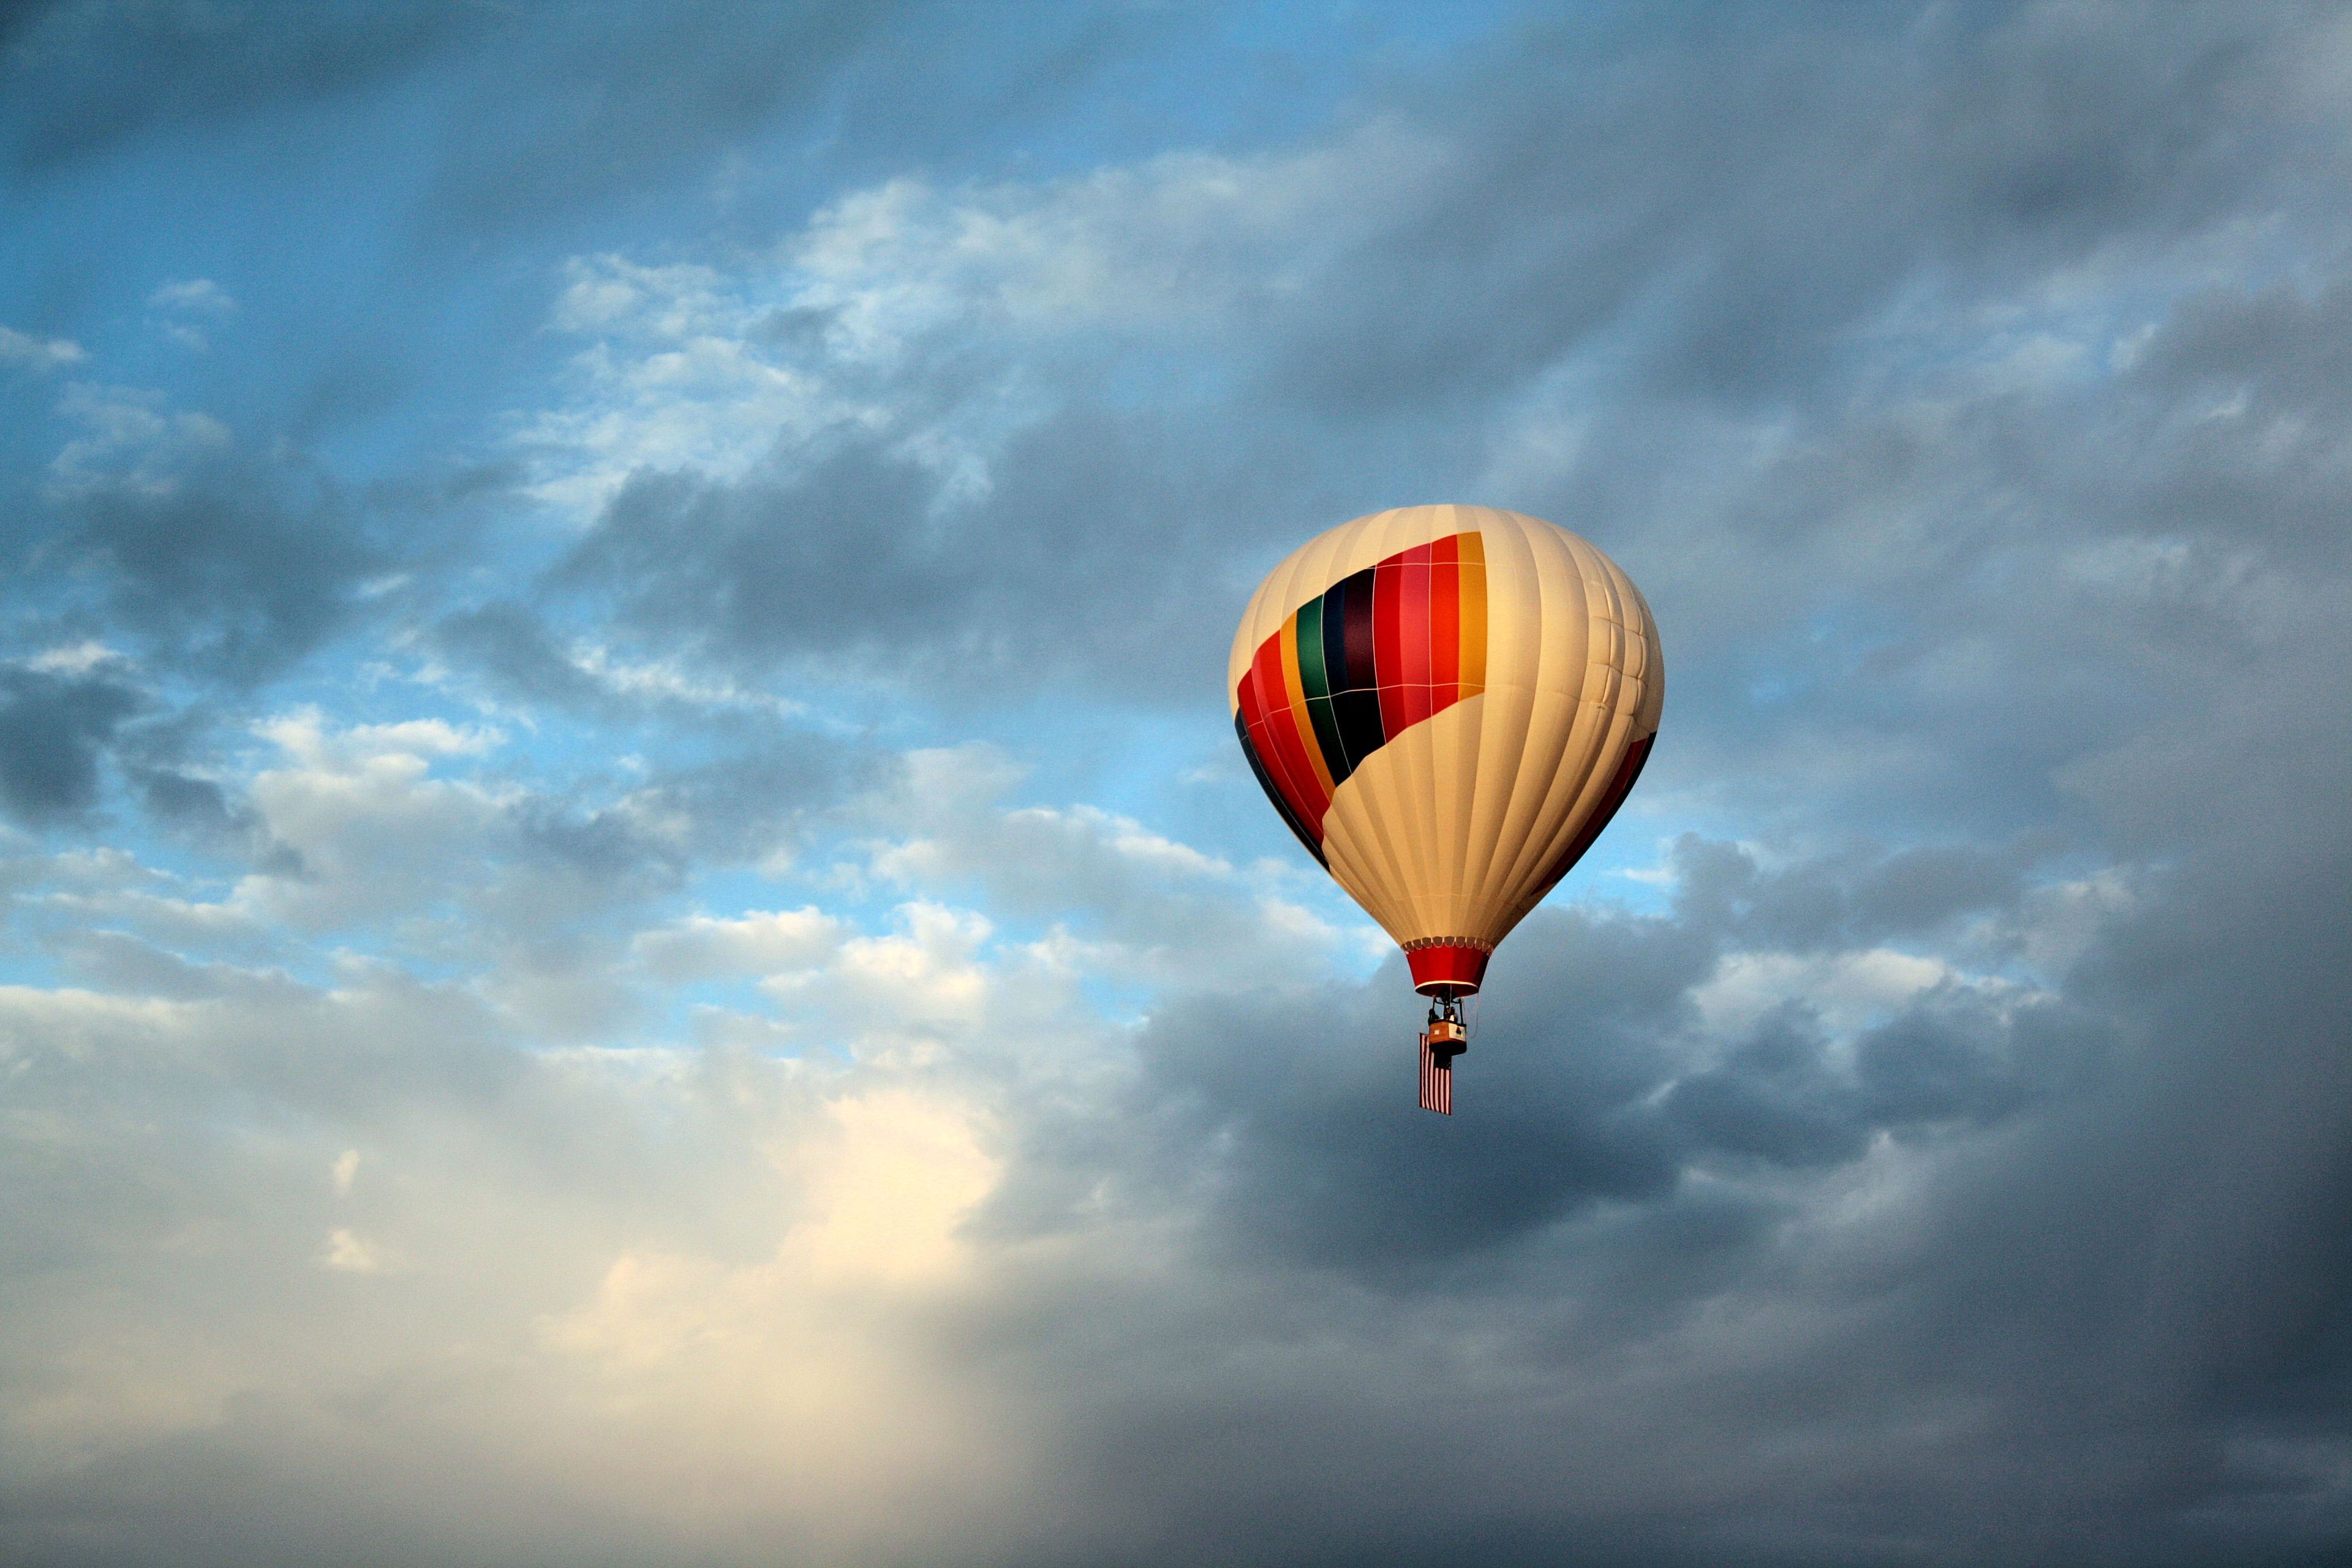 A hot air balloon is seen flying through white and gray clouds, with a blue sky in the background.